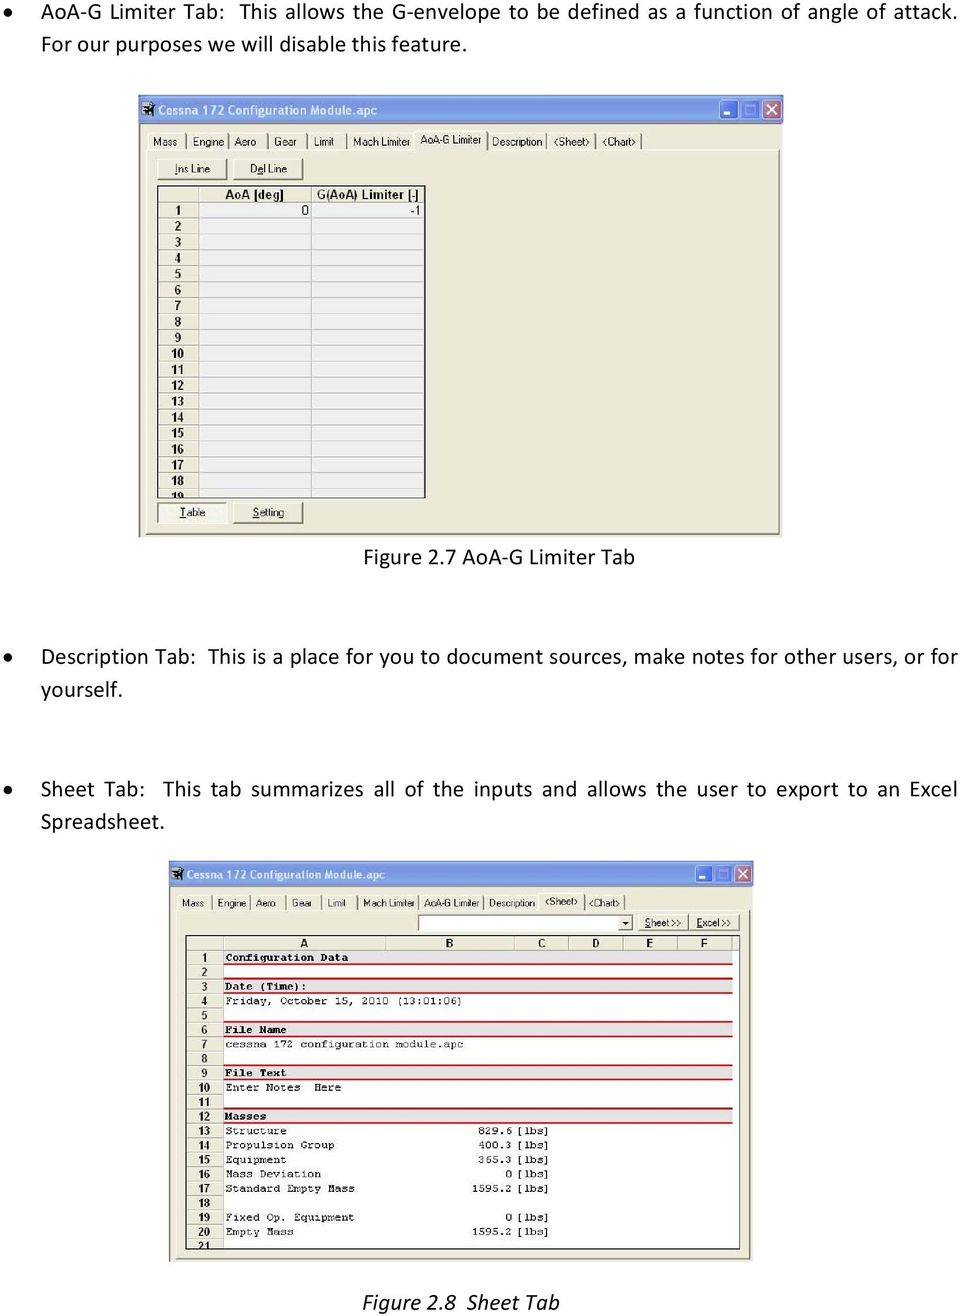 7 AoA G Limiter Tab Description Tab: This is a place for you to document sources, make notes for